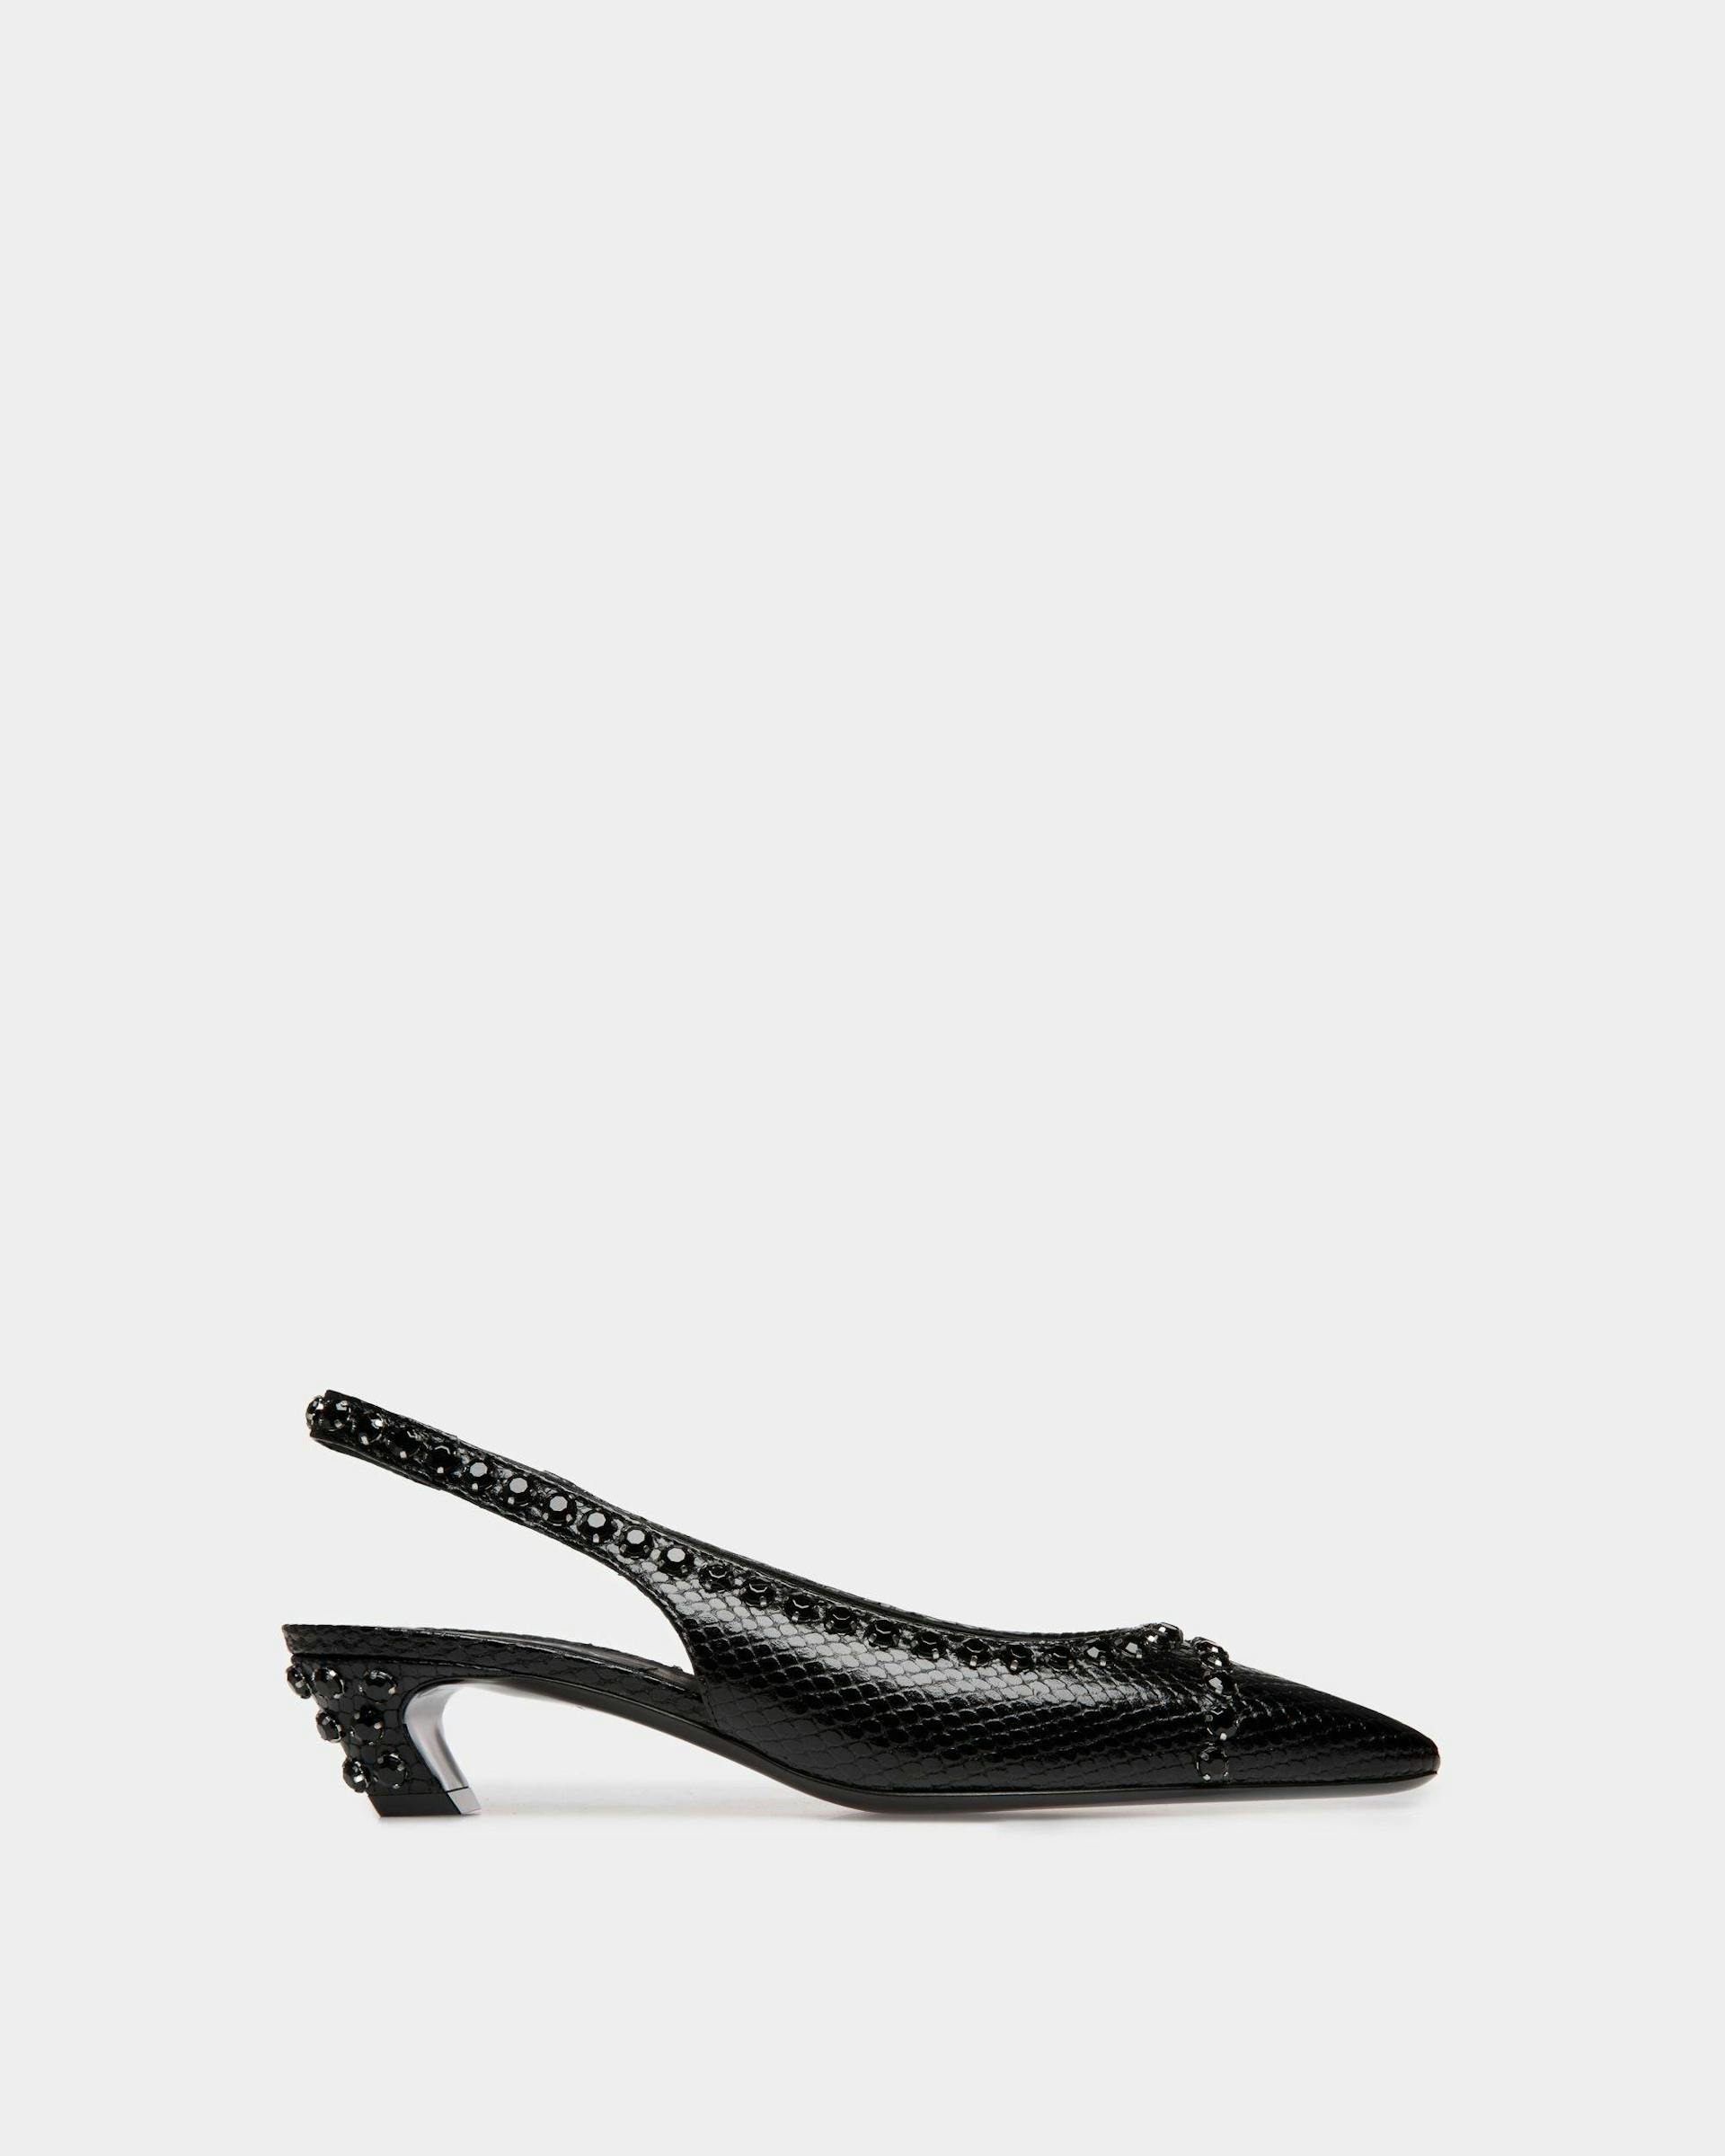 Women's Sylt Slingback Pump in Black Python Printed Leather | Bally | Still Life Side